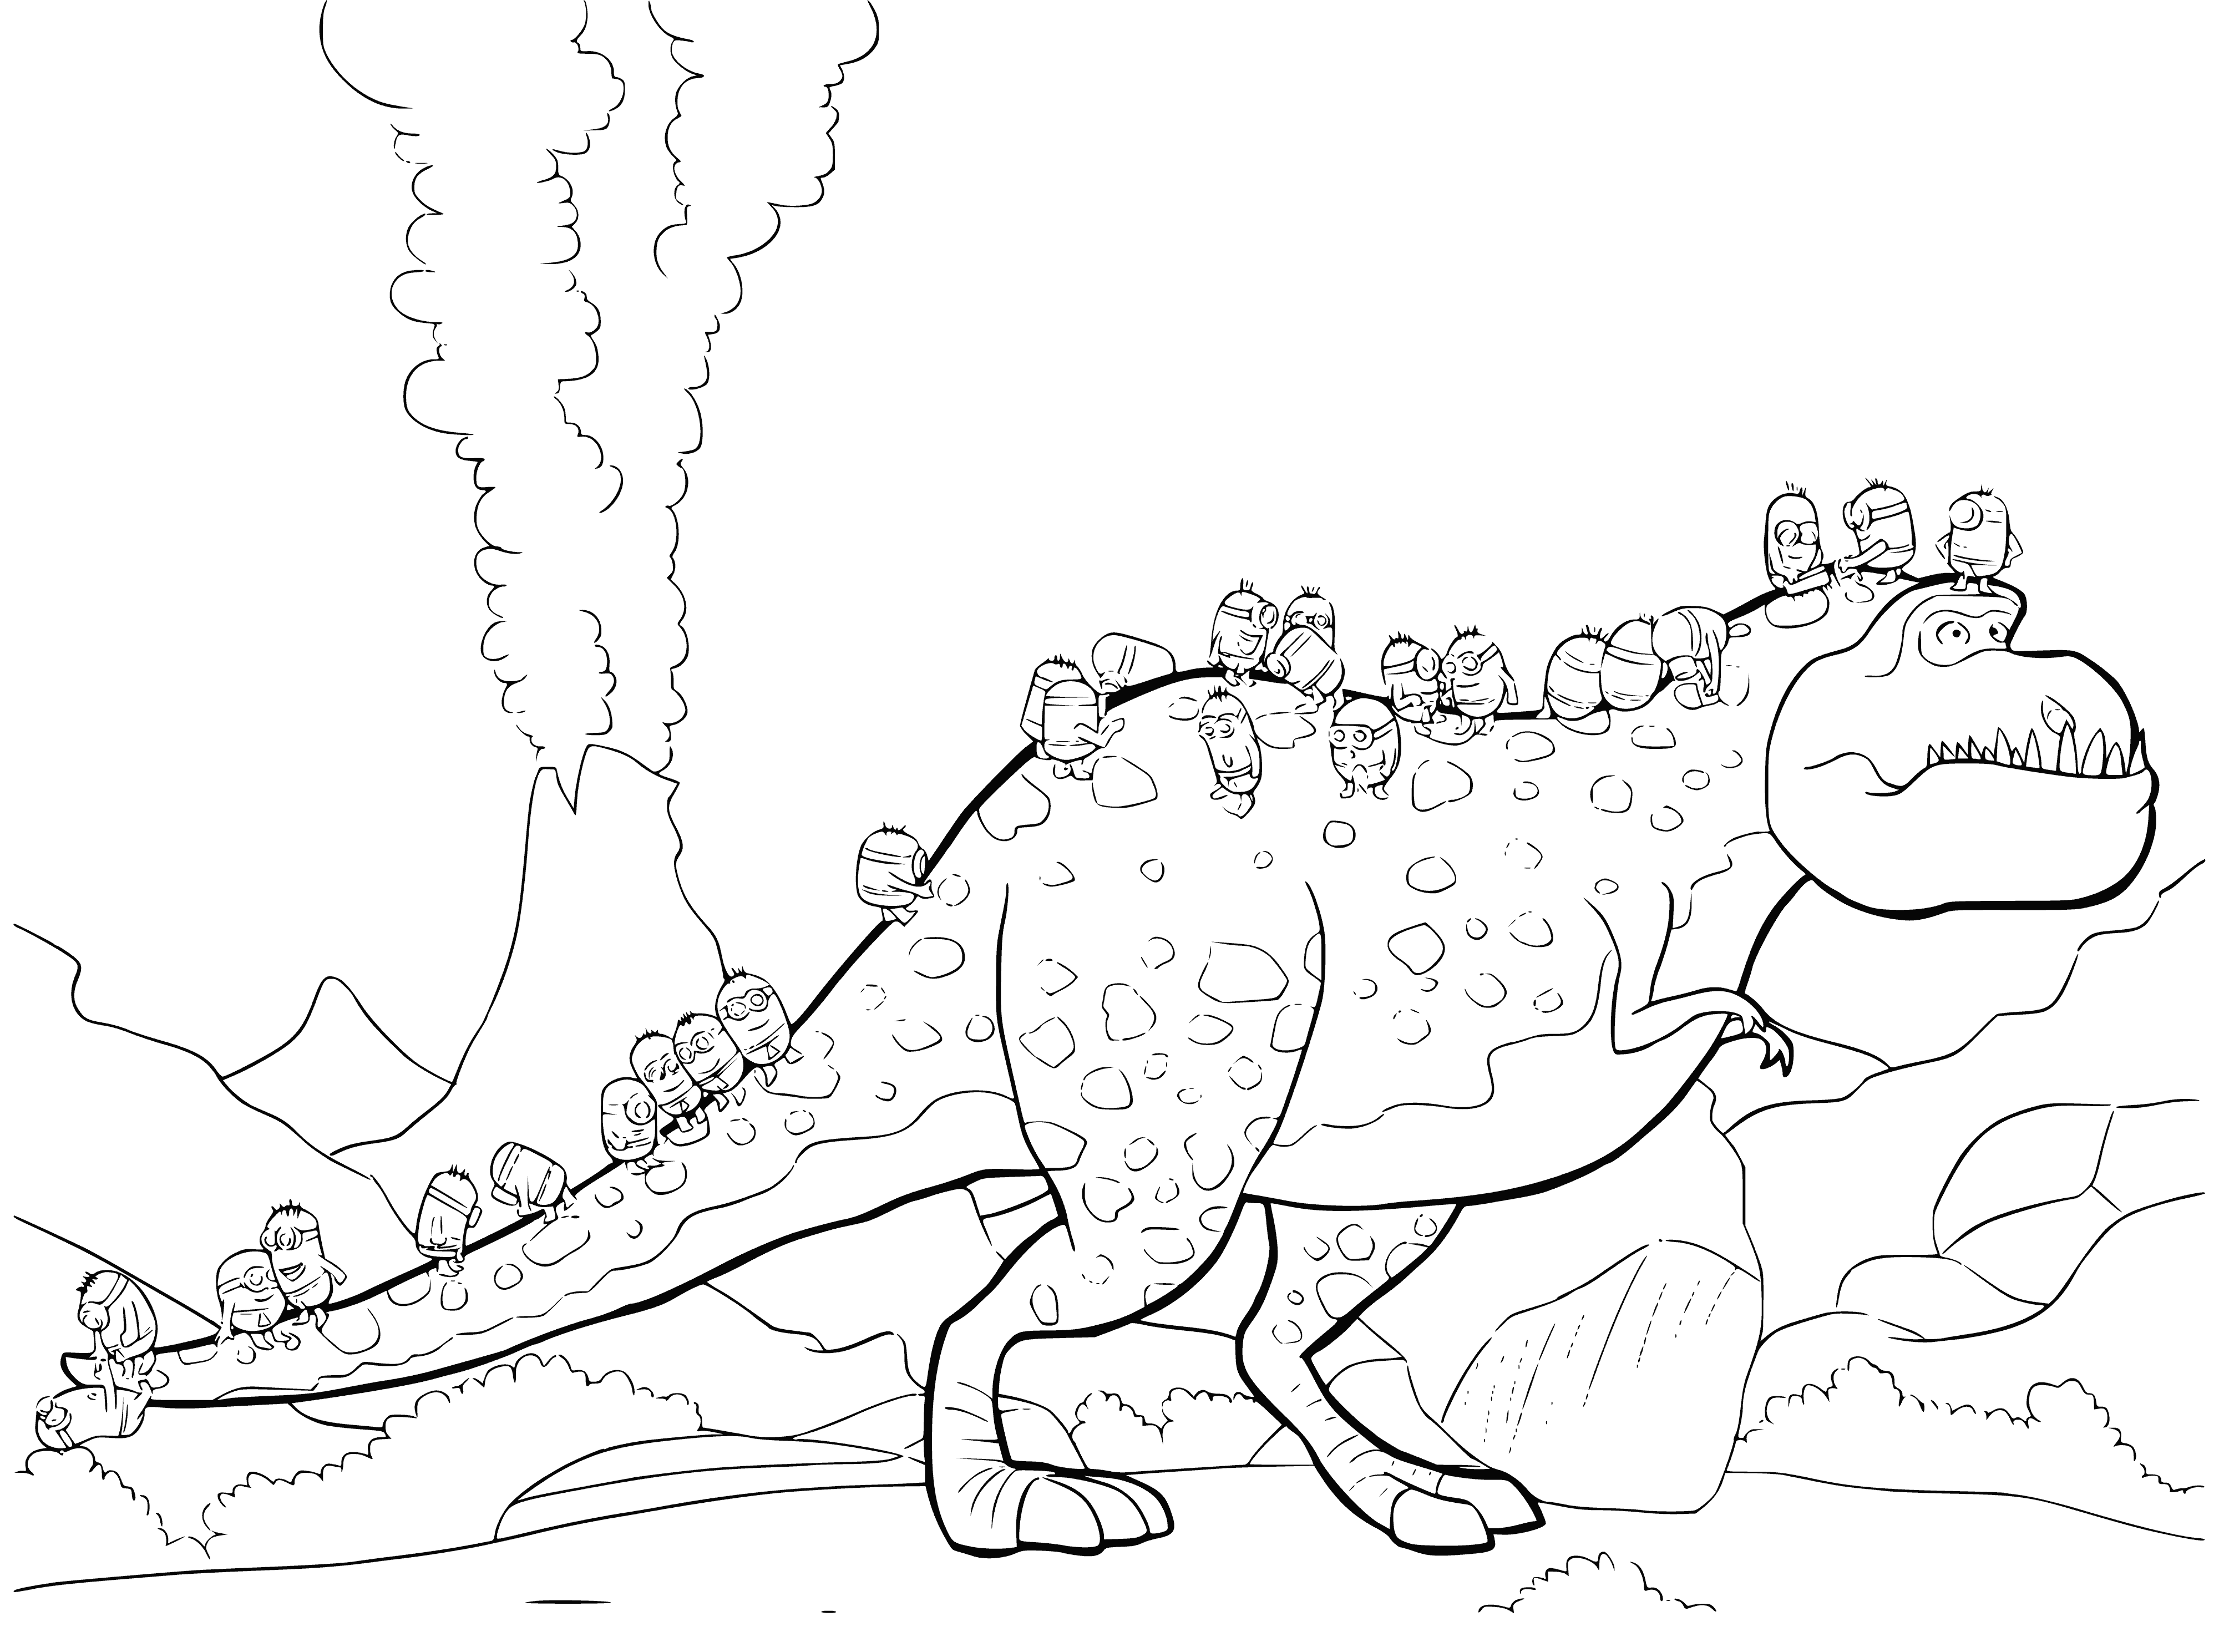 Minions on a dinosaur coloring page